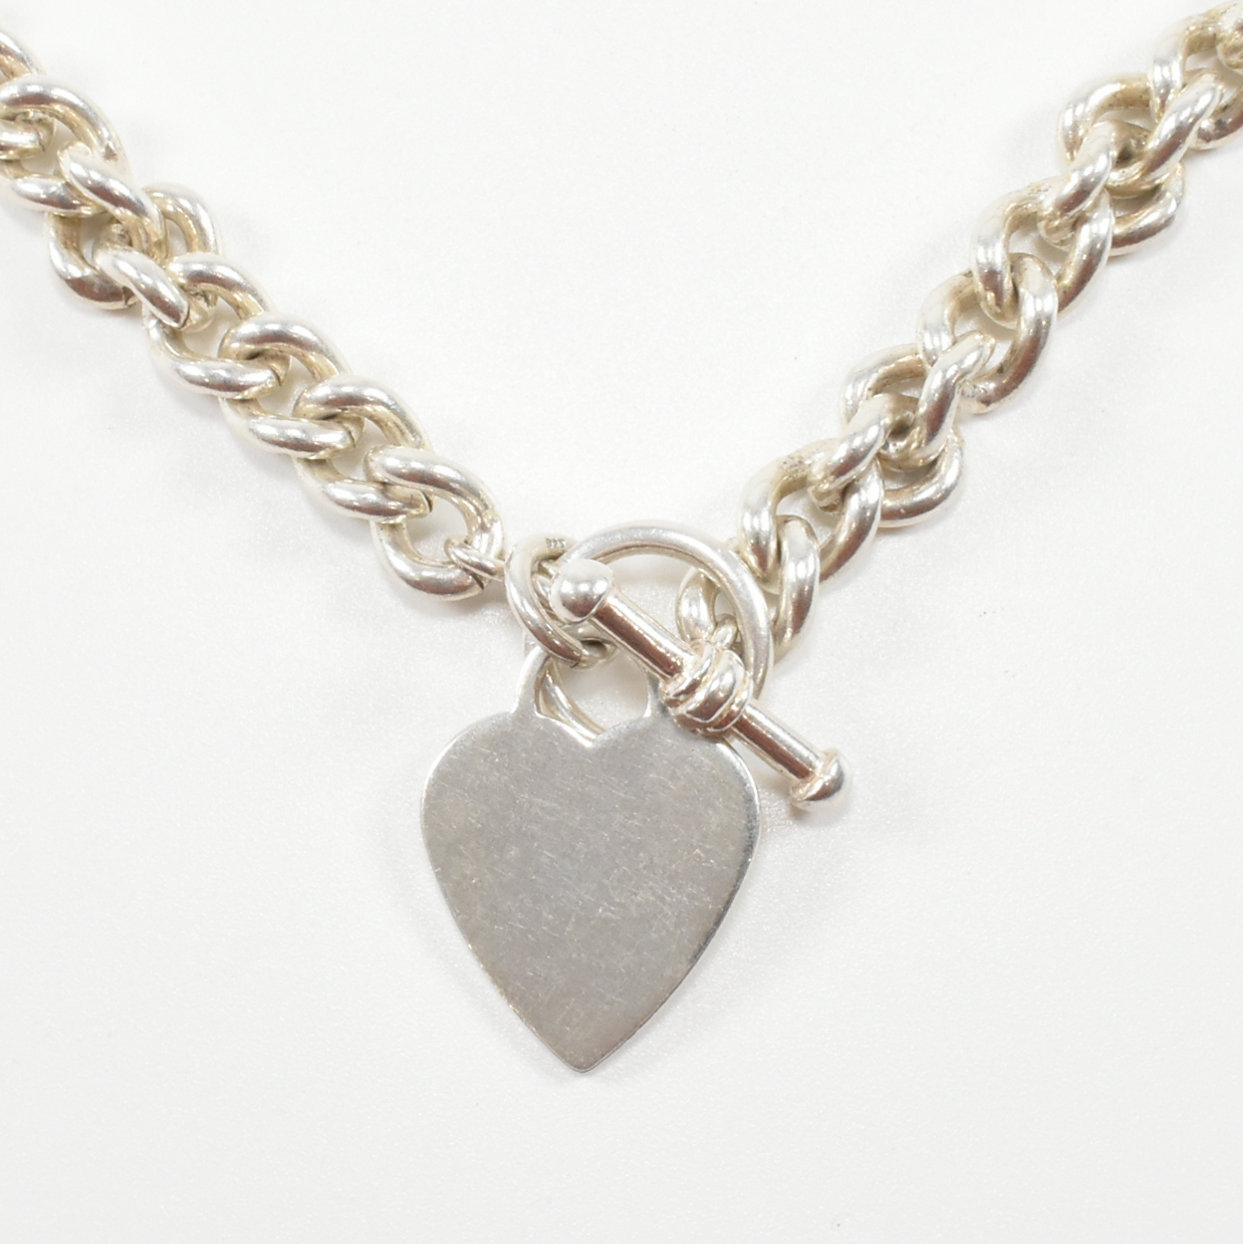 CONTEMPORARY 925 SILVER T BAR CURB LINK CHAIN & HEART PENDANT - Image 2 of 5